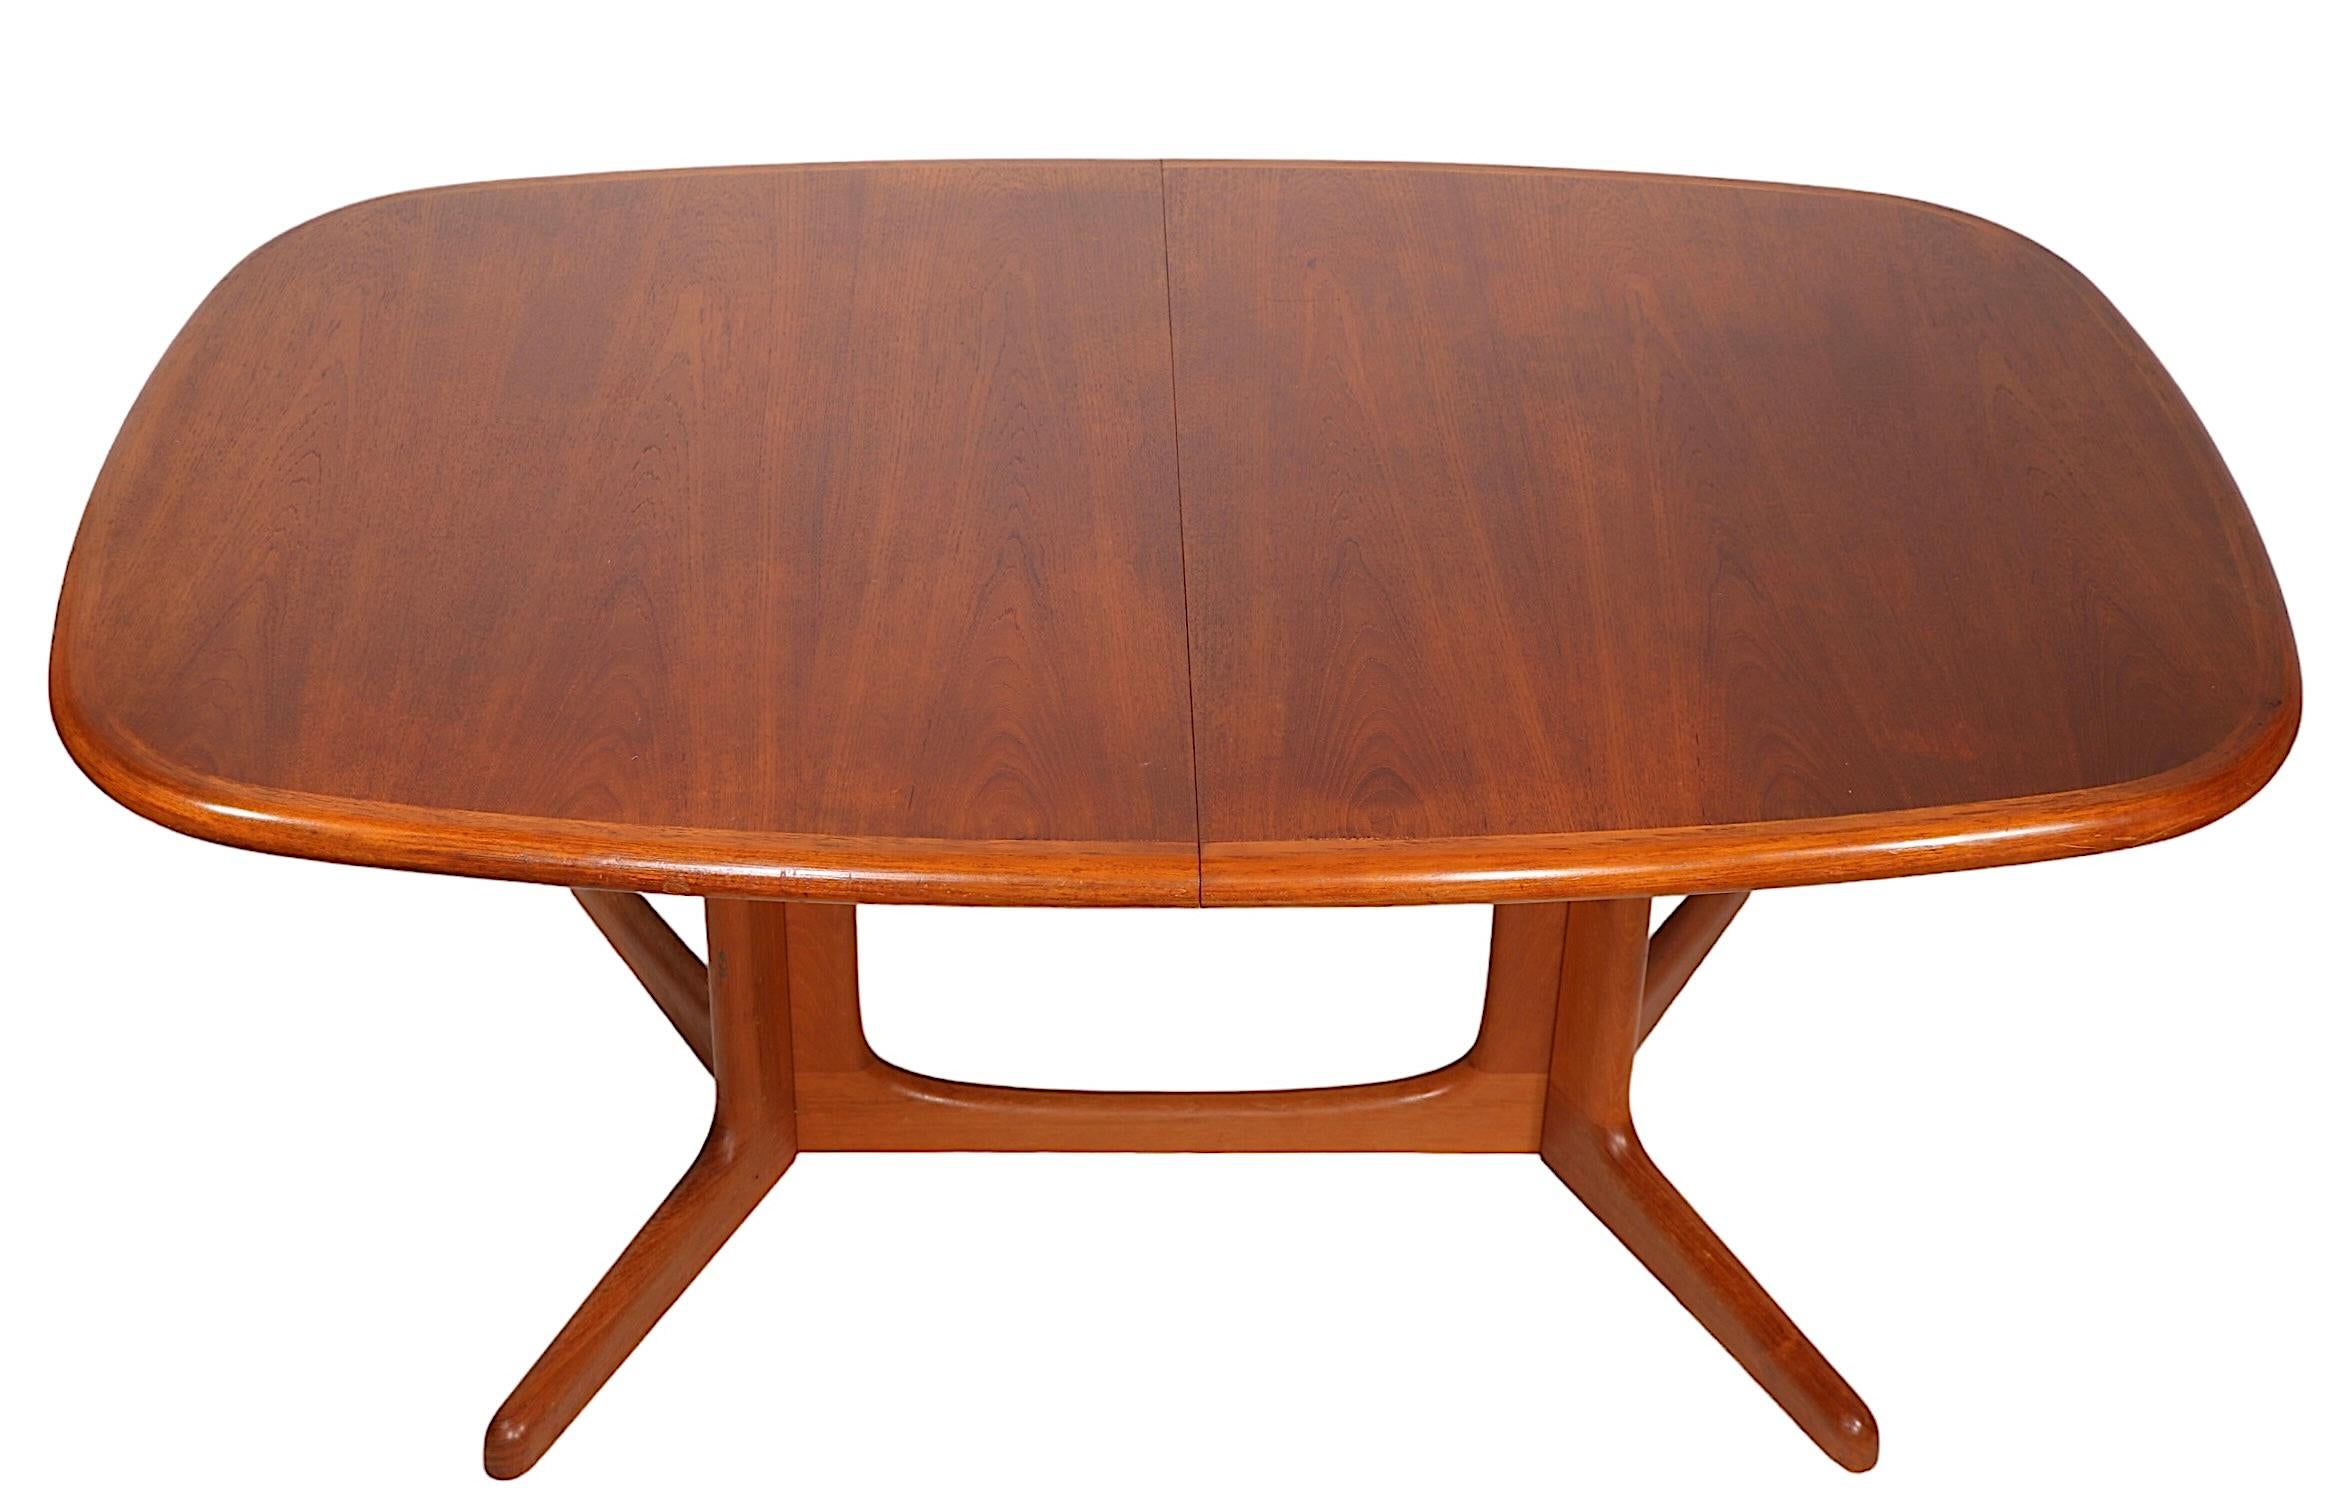 Scandinavian Modern Danish Mid Century Oval Teak Dining Table by Niels Otto Moller for Gudme c 1970s For Sale